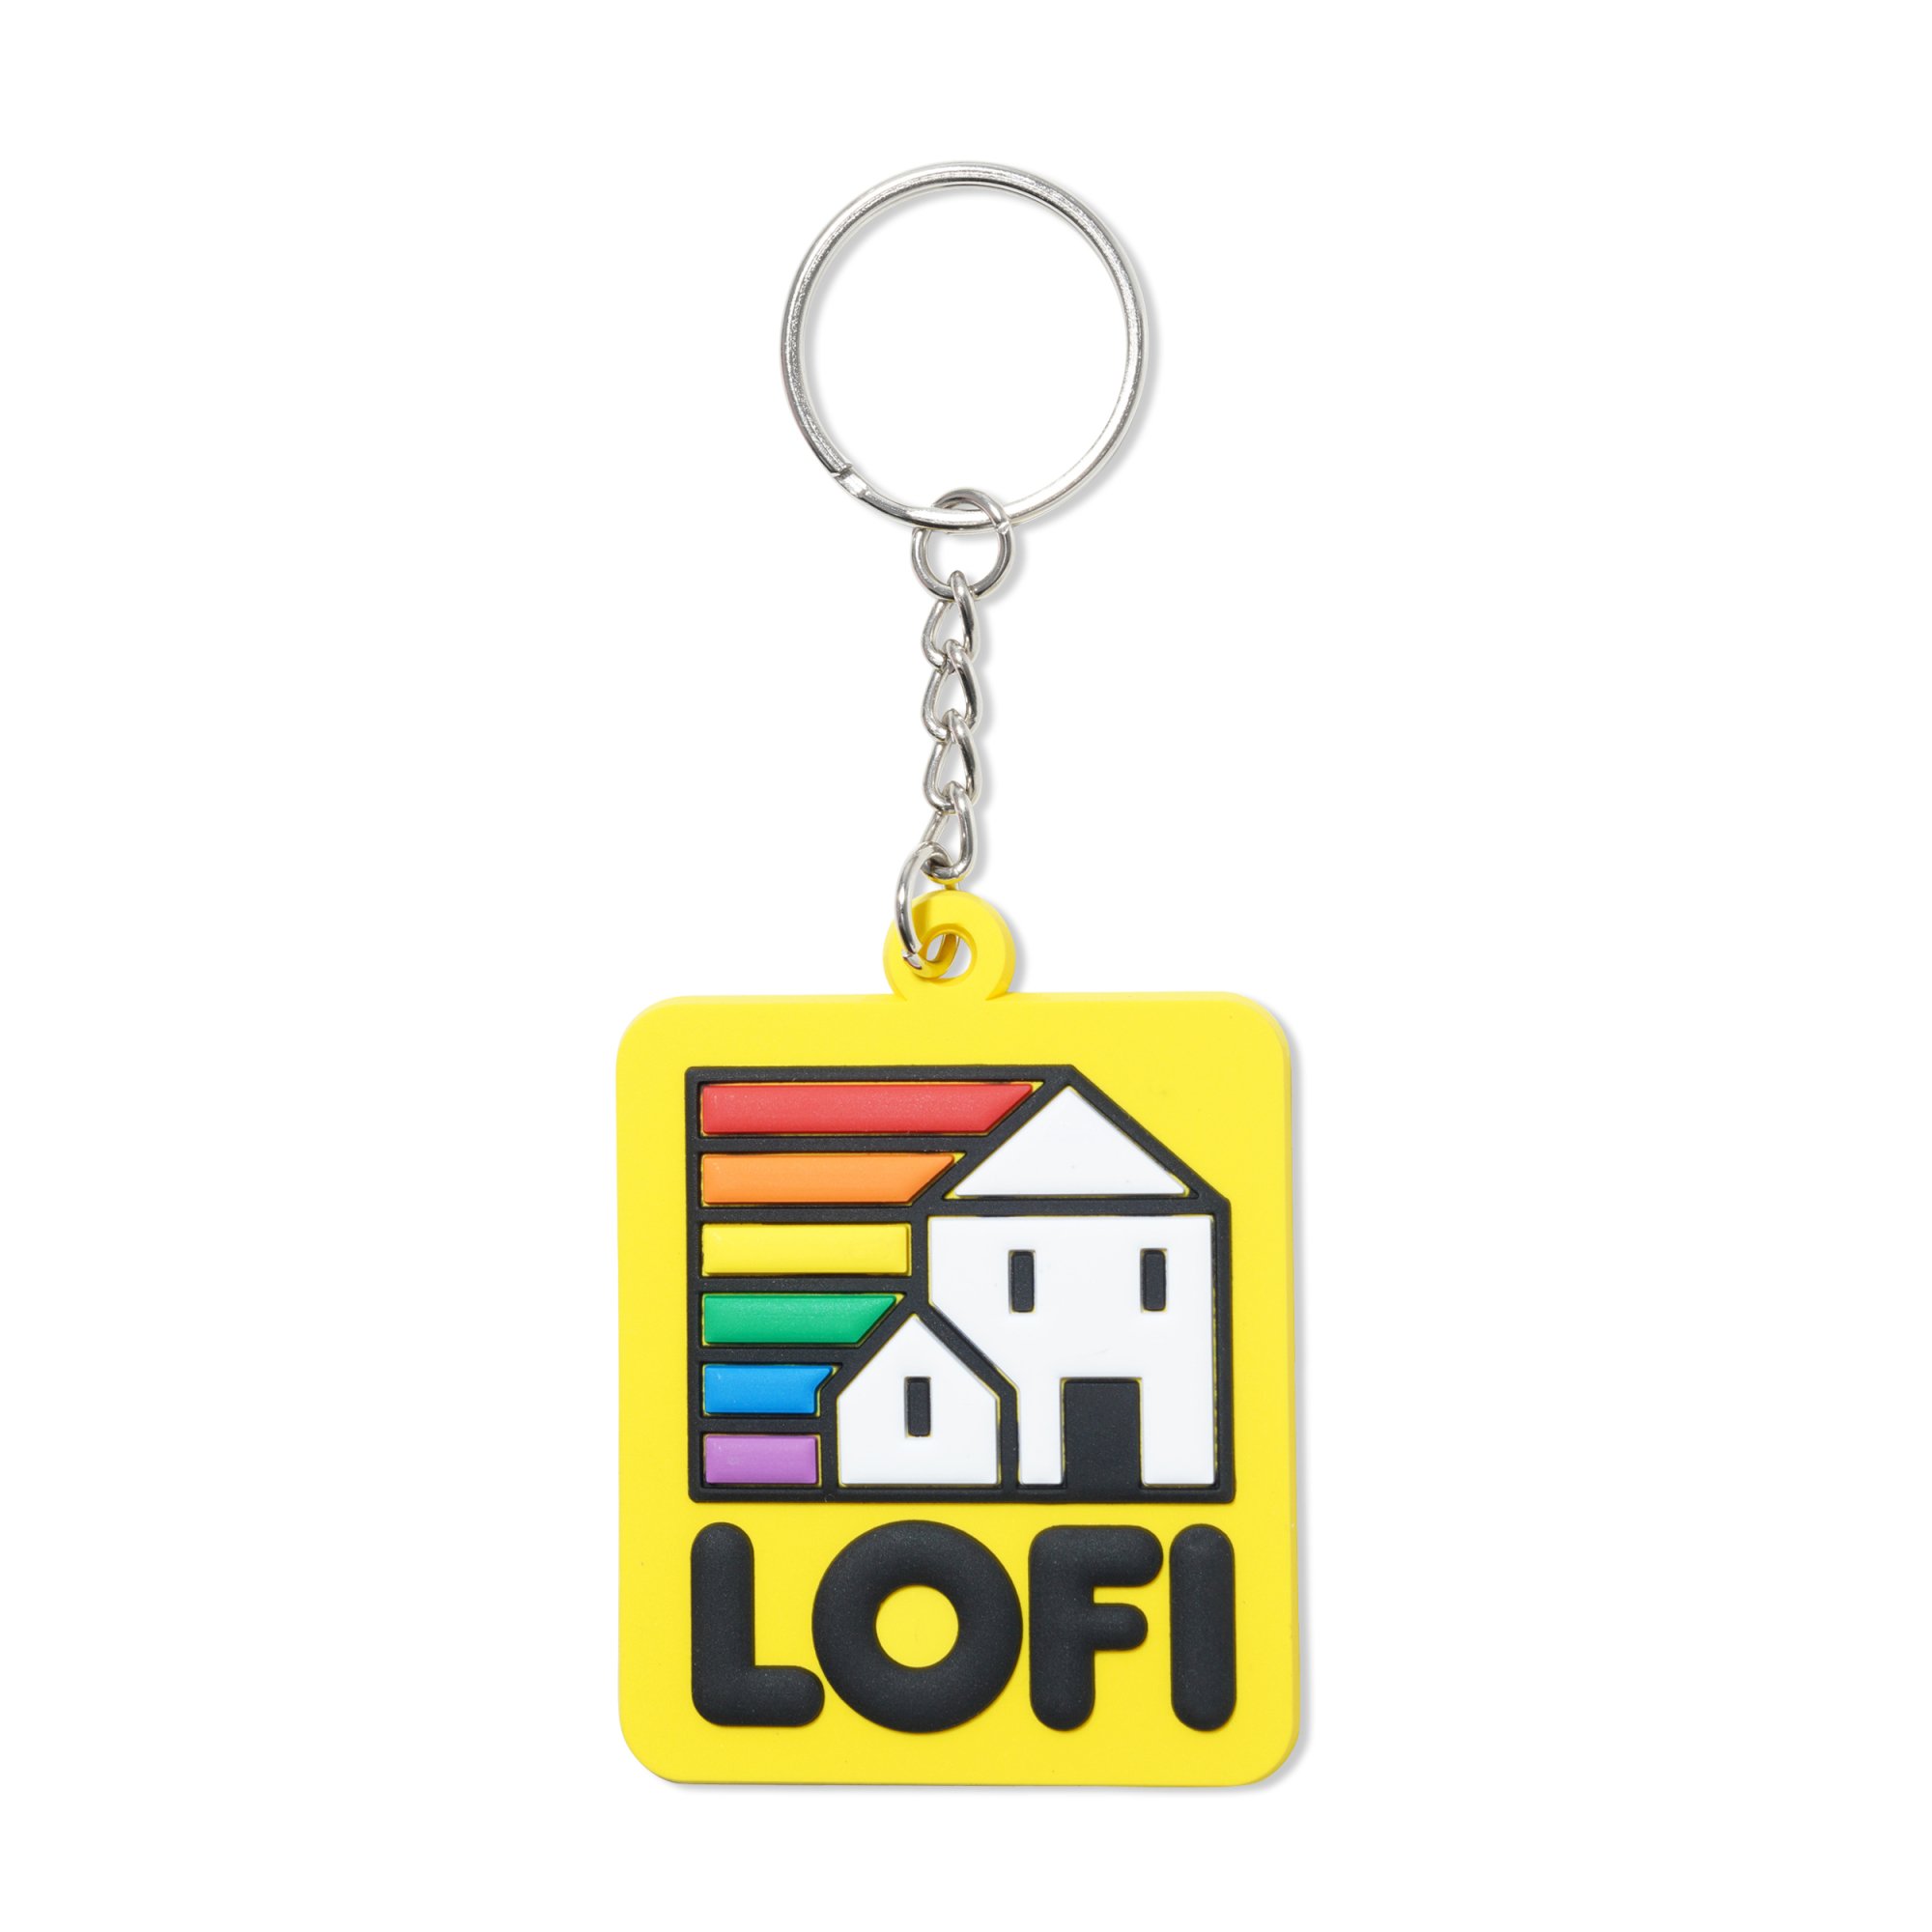 Lo-Fi<br>Production House Rubber Key Chain<br>